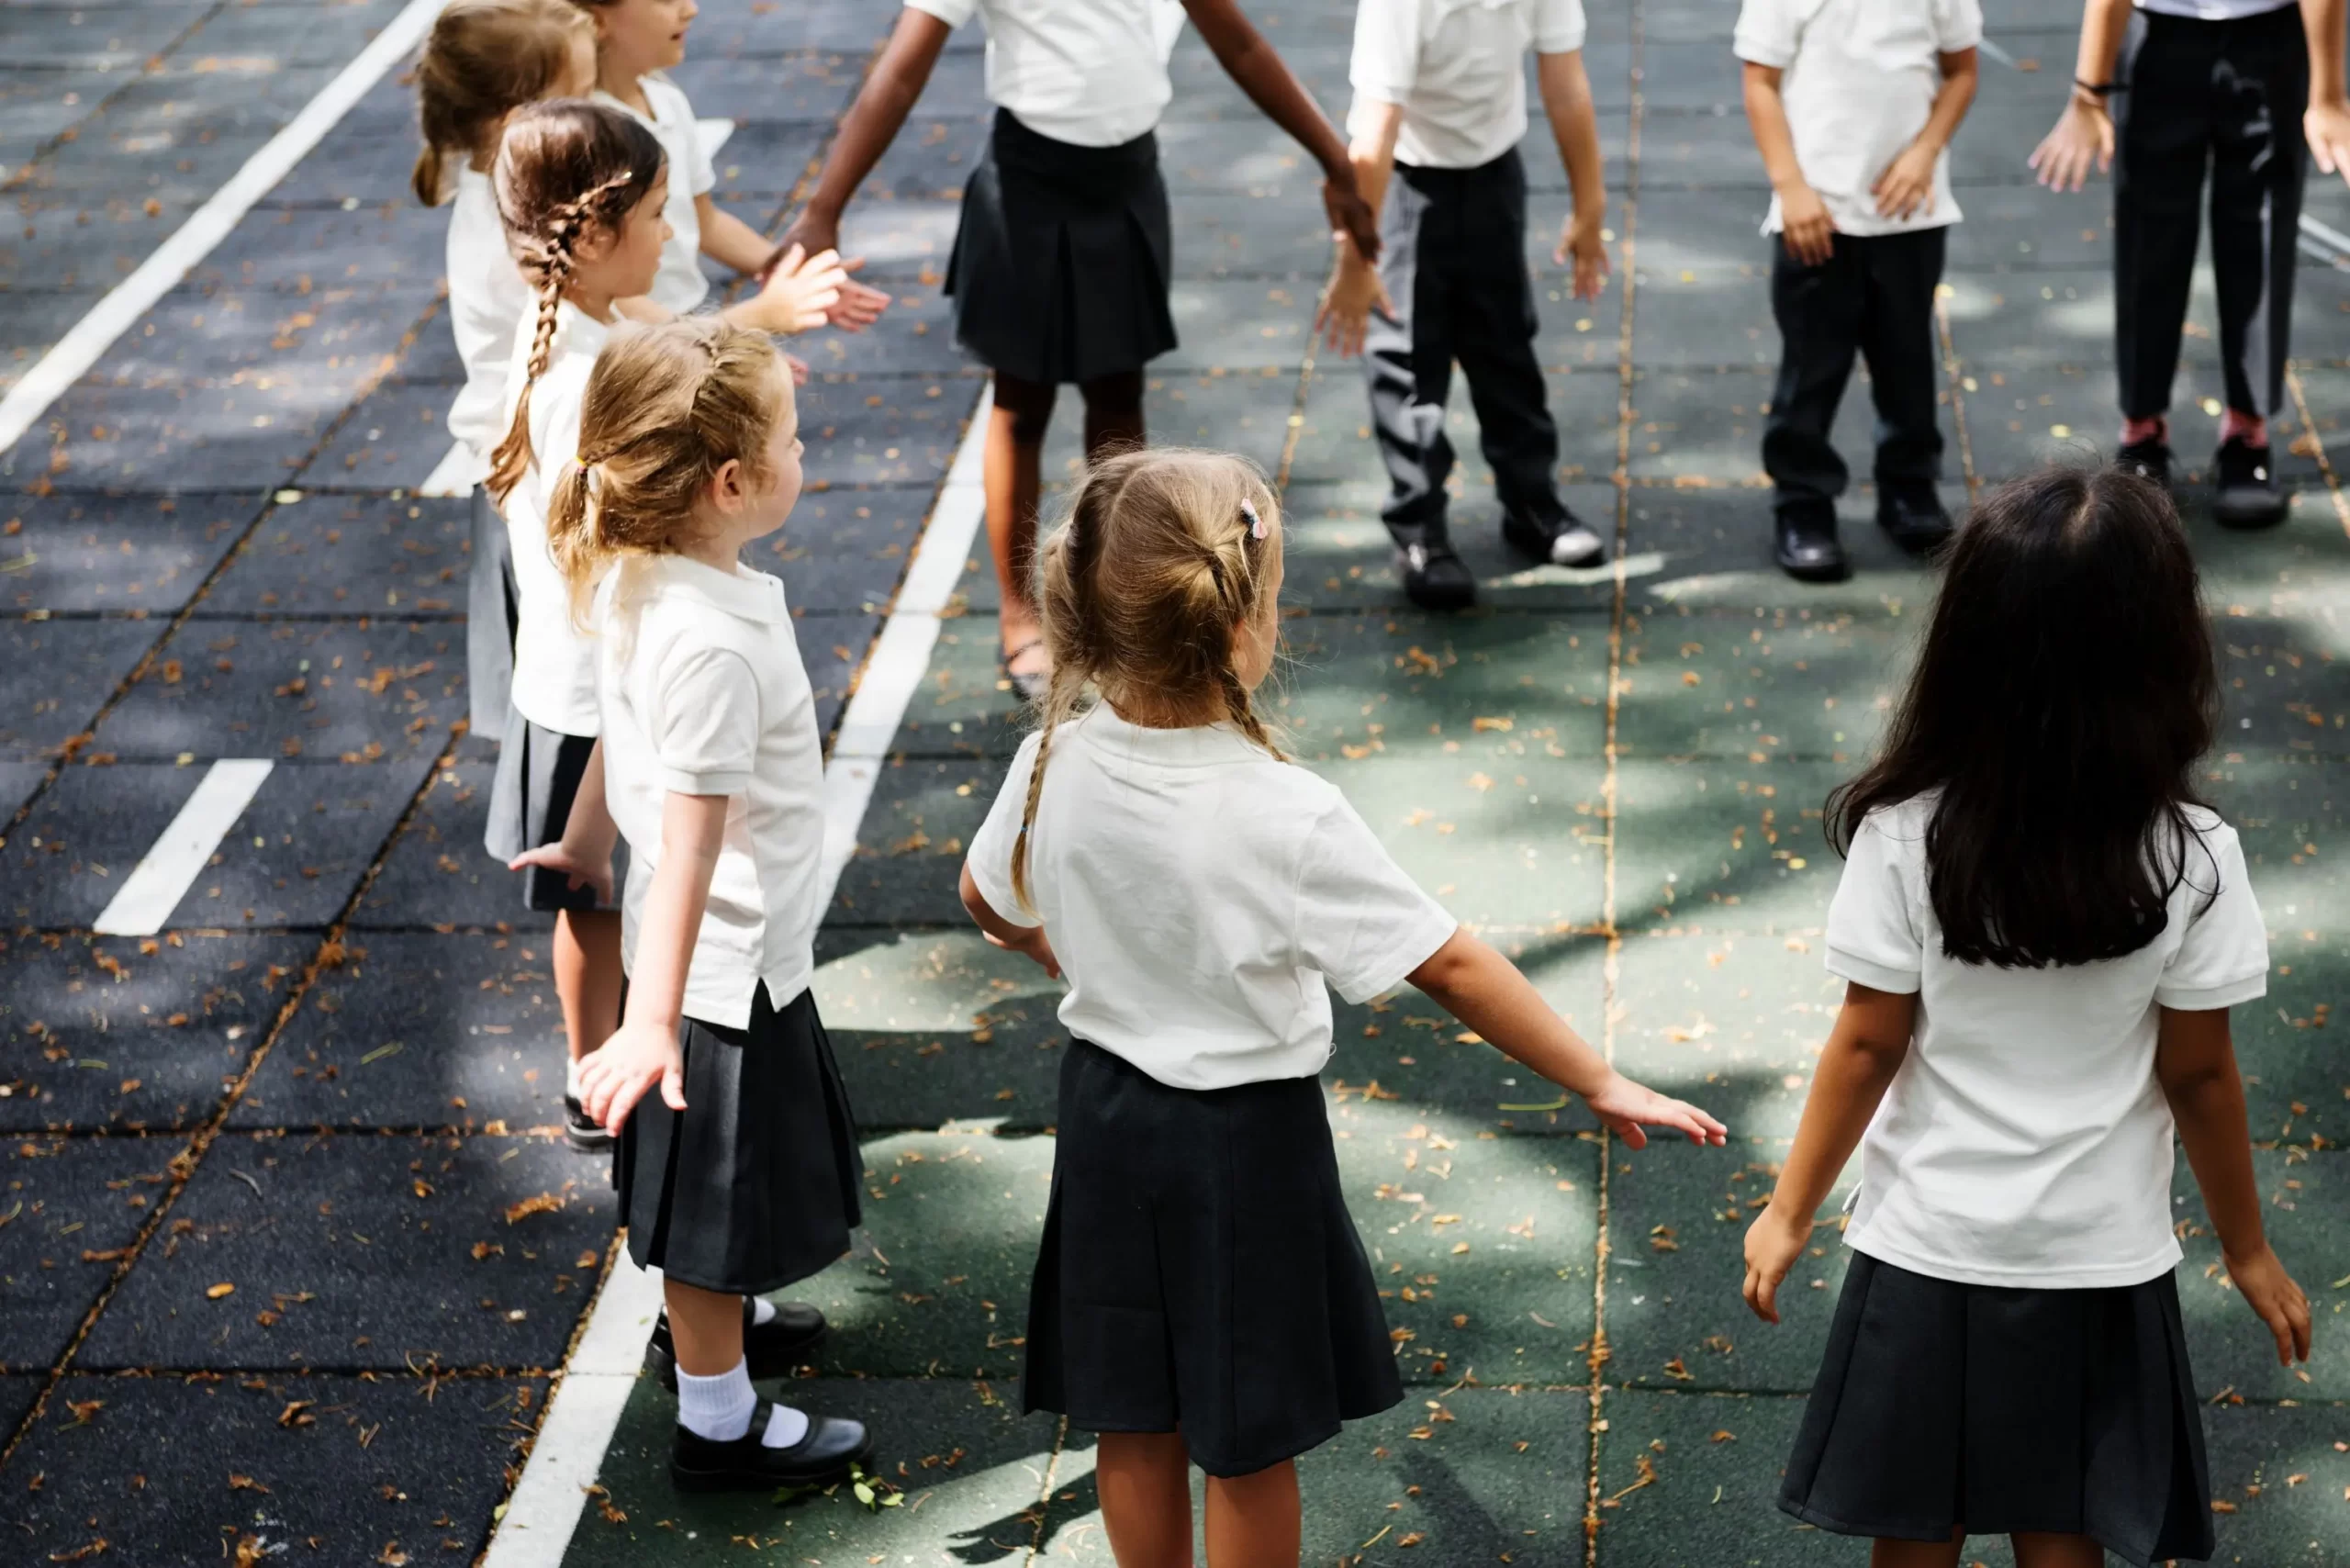 A group of Primary School students playing together outside in a circle on a playground.